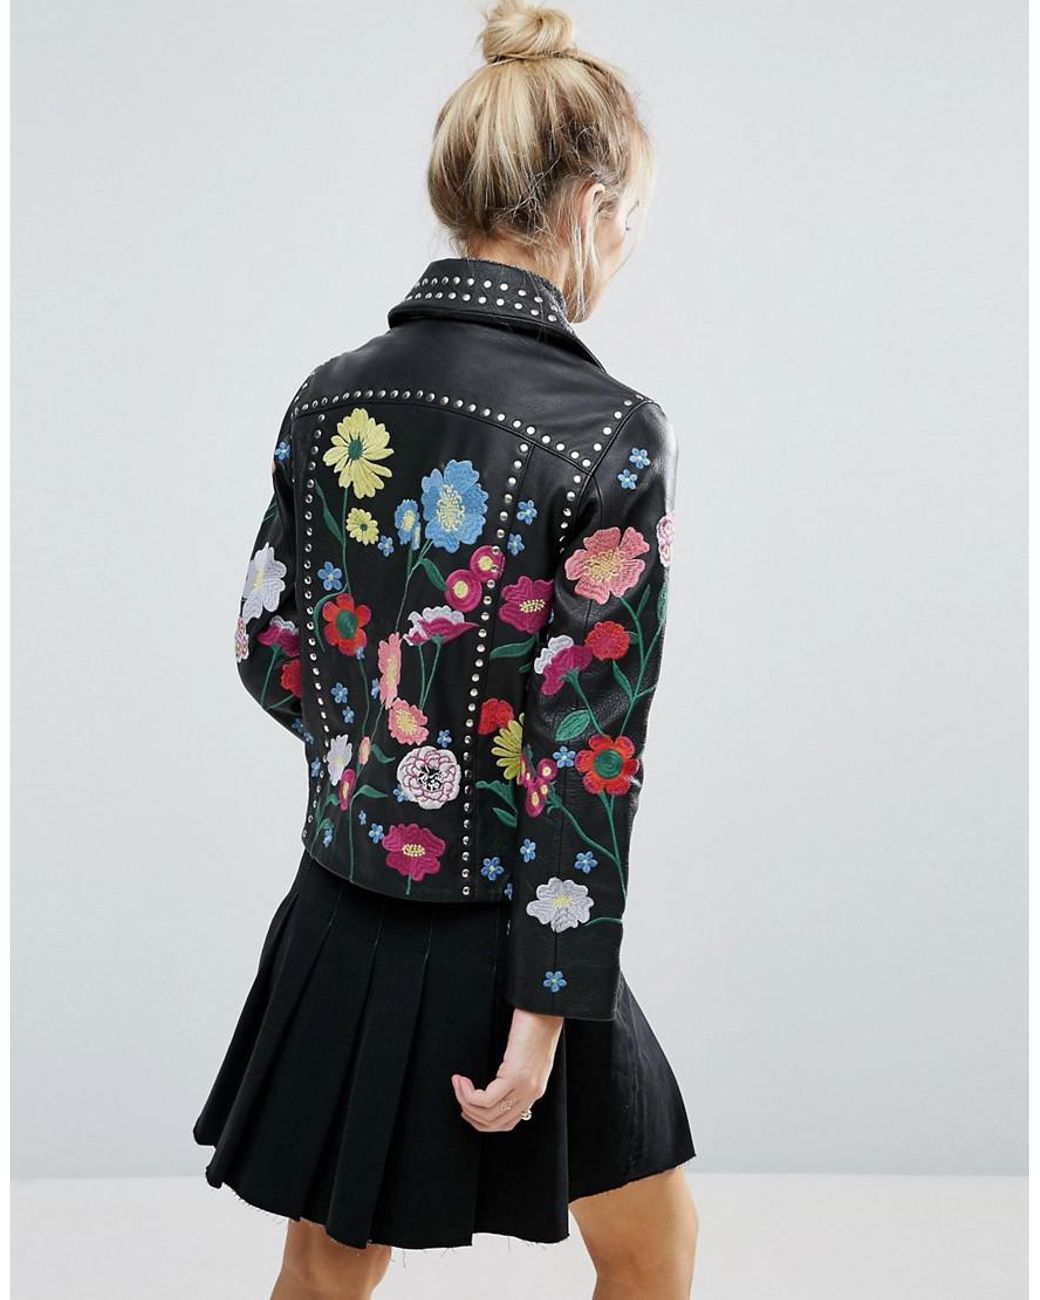 ASOS Premium Leather Biker Jacket With Floral Embroidery